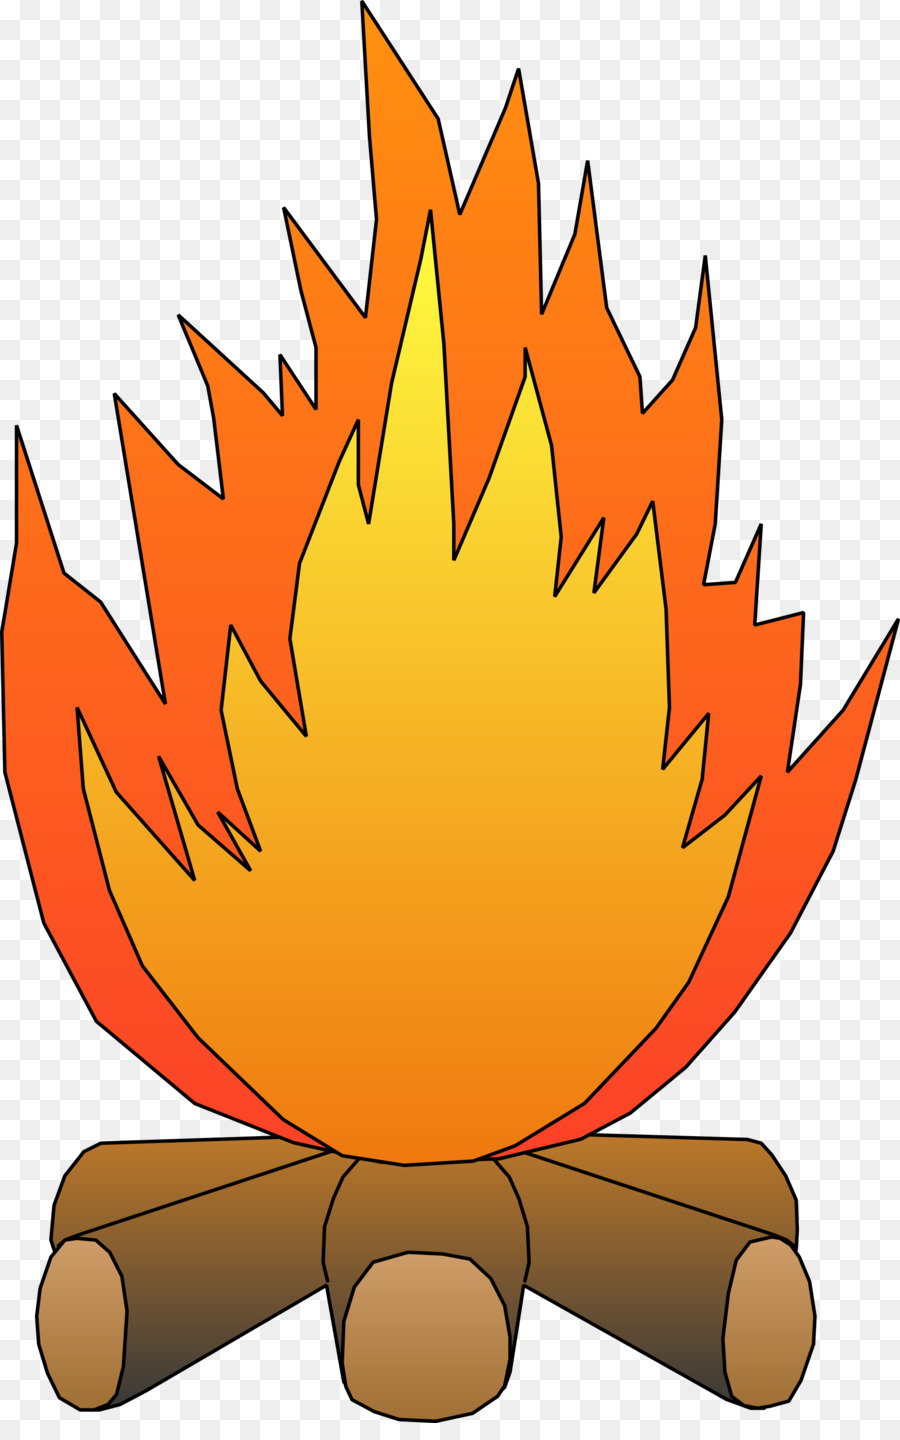 Feuer Flamme clipart - Lagerfeuer cliparts